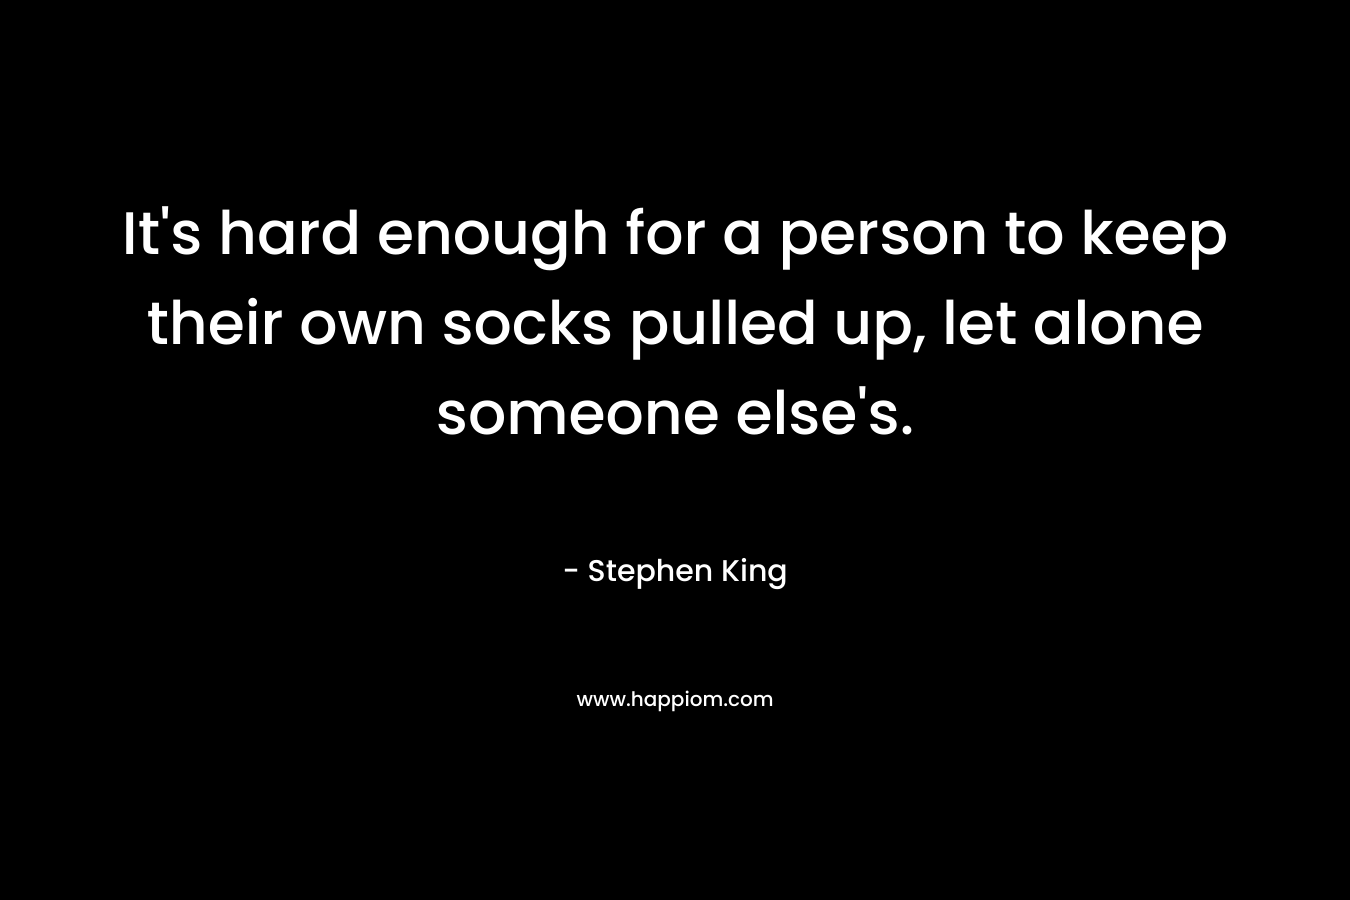 It’s hard enough for a person to keep their own socks pulled up, let alone someone else’s. – Stephen King